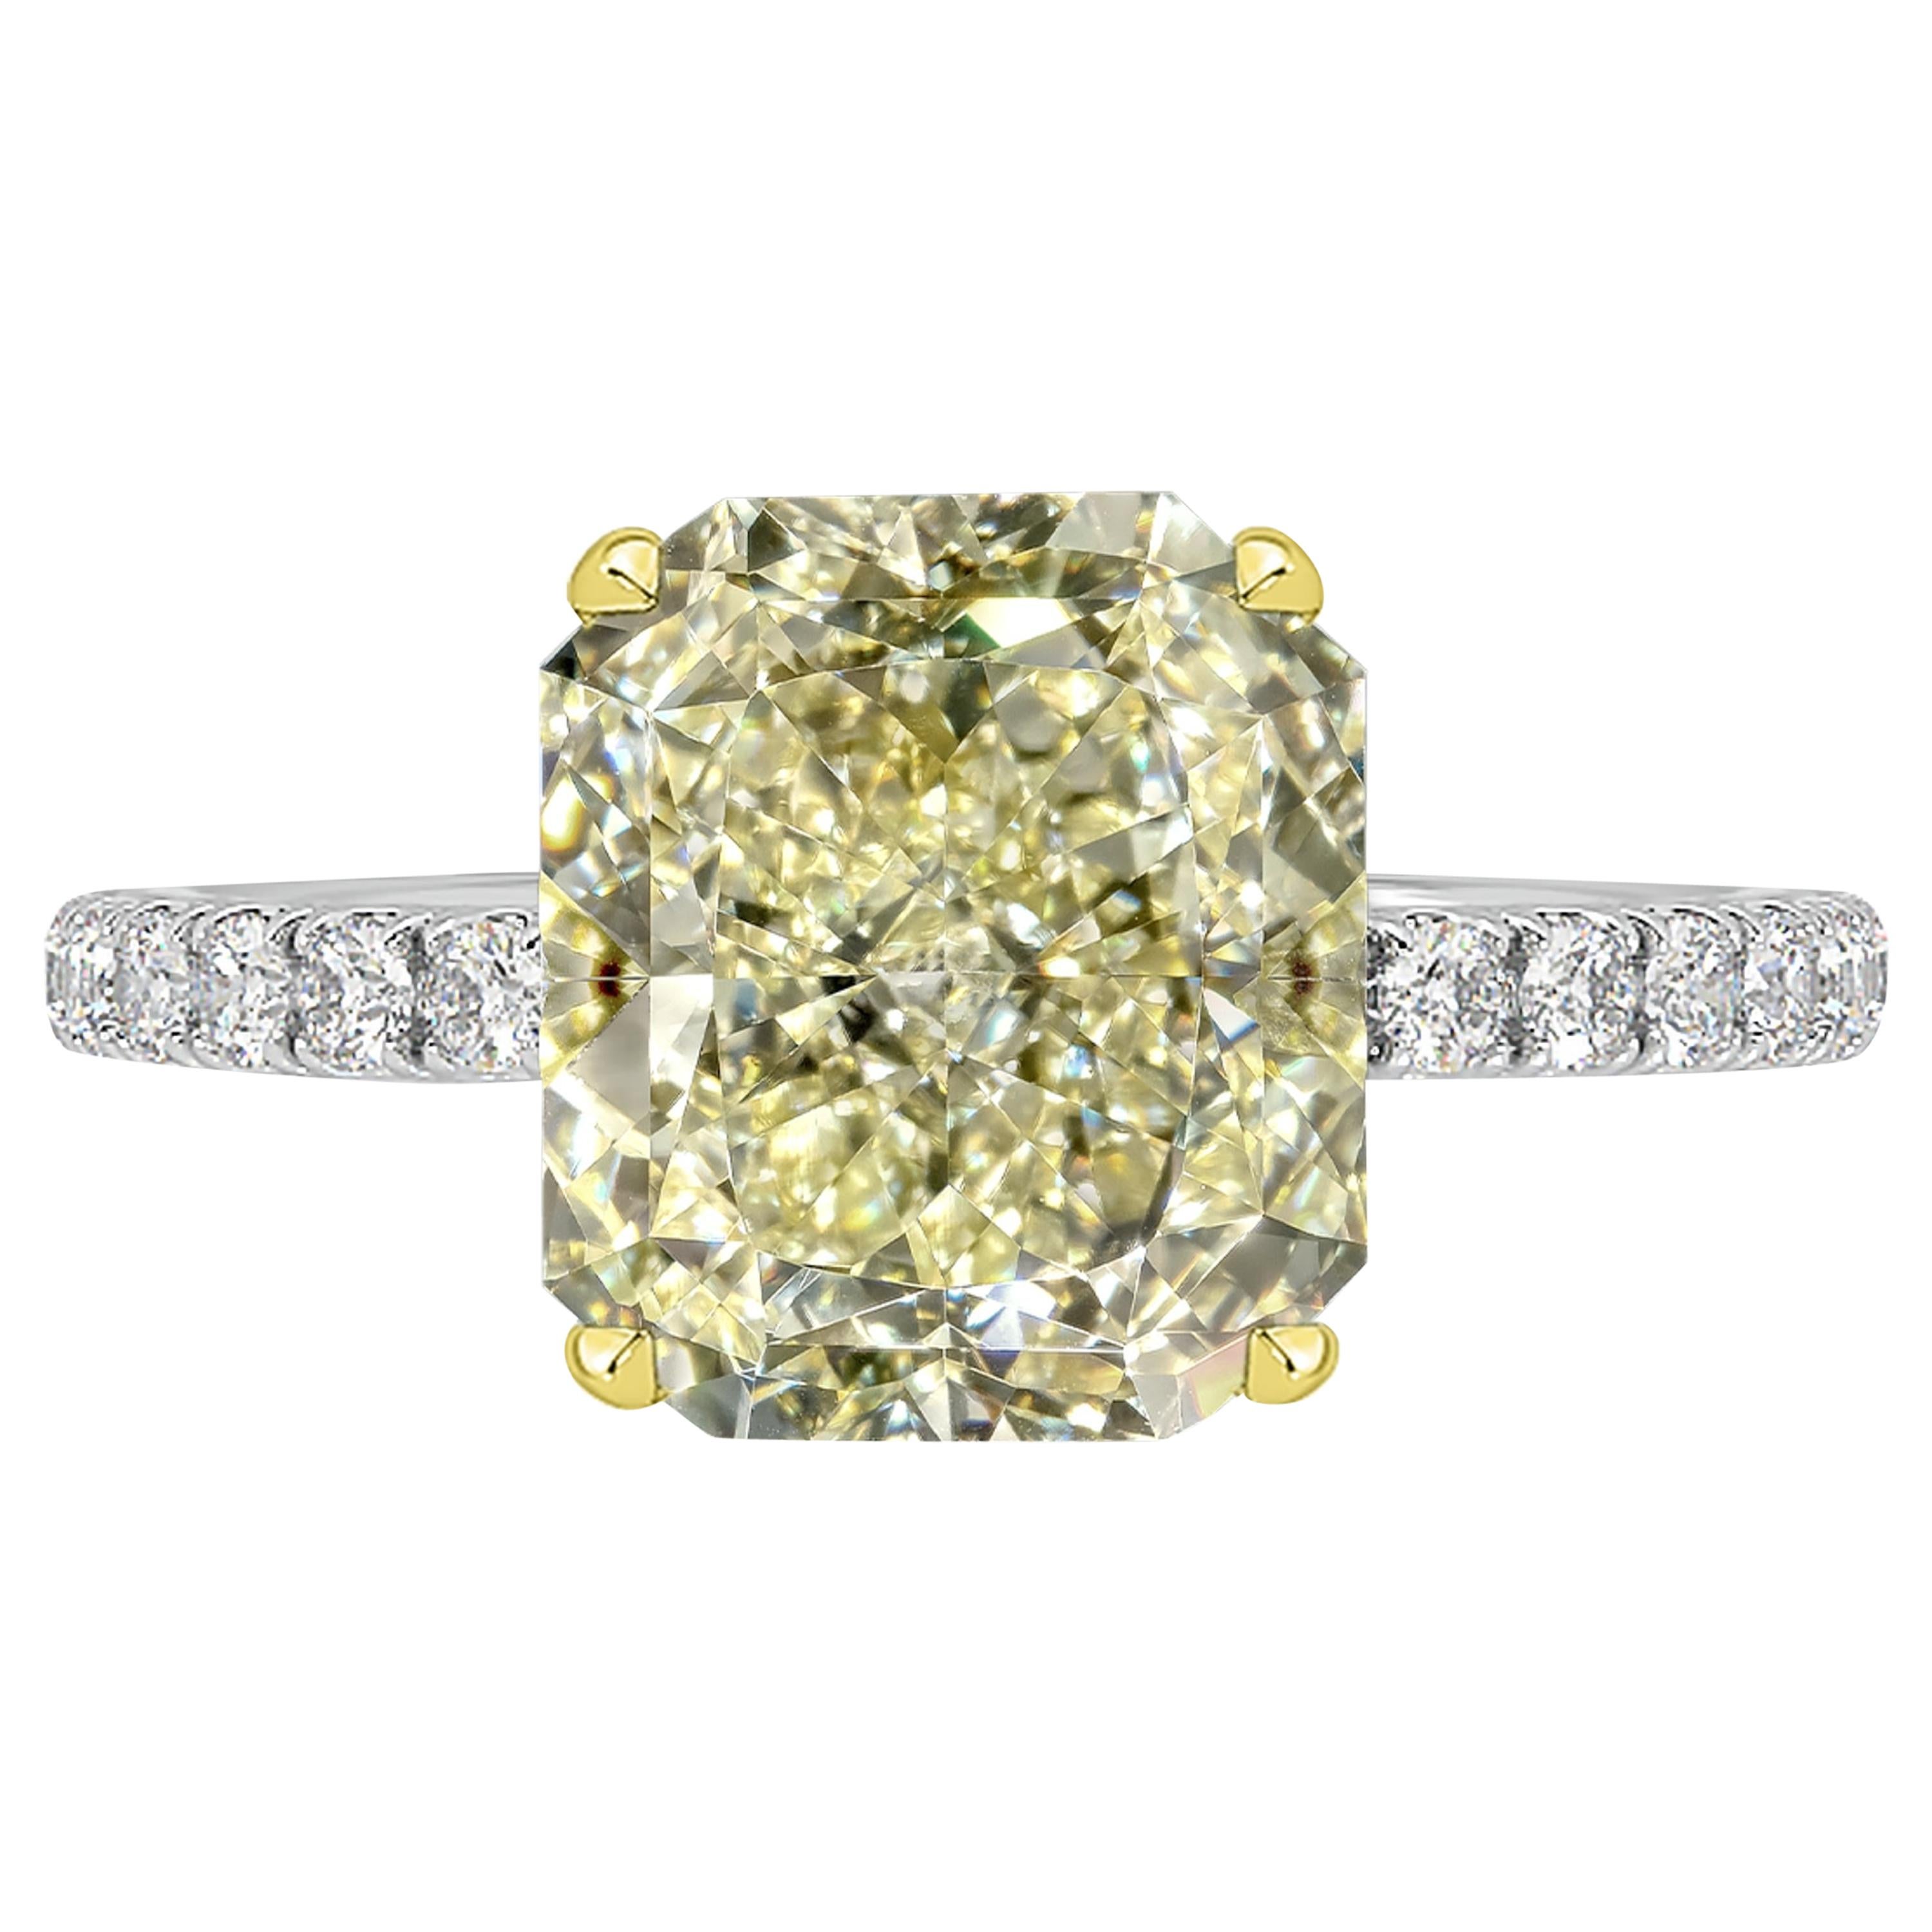 GIA Certified 3.01 Carat Radiant Cut Yellow Diamond Ring For Sale